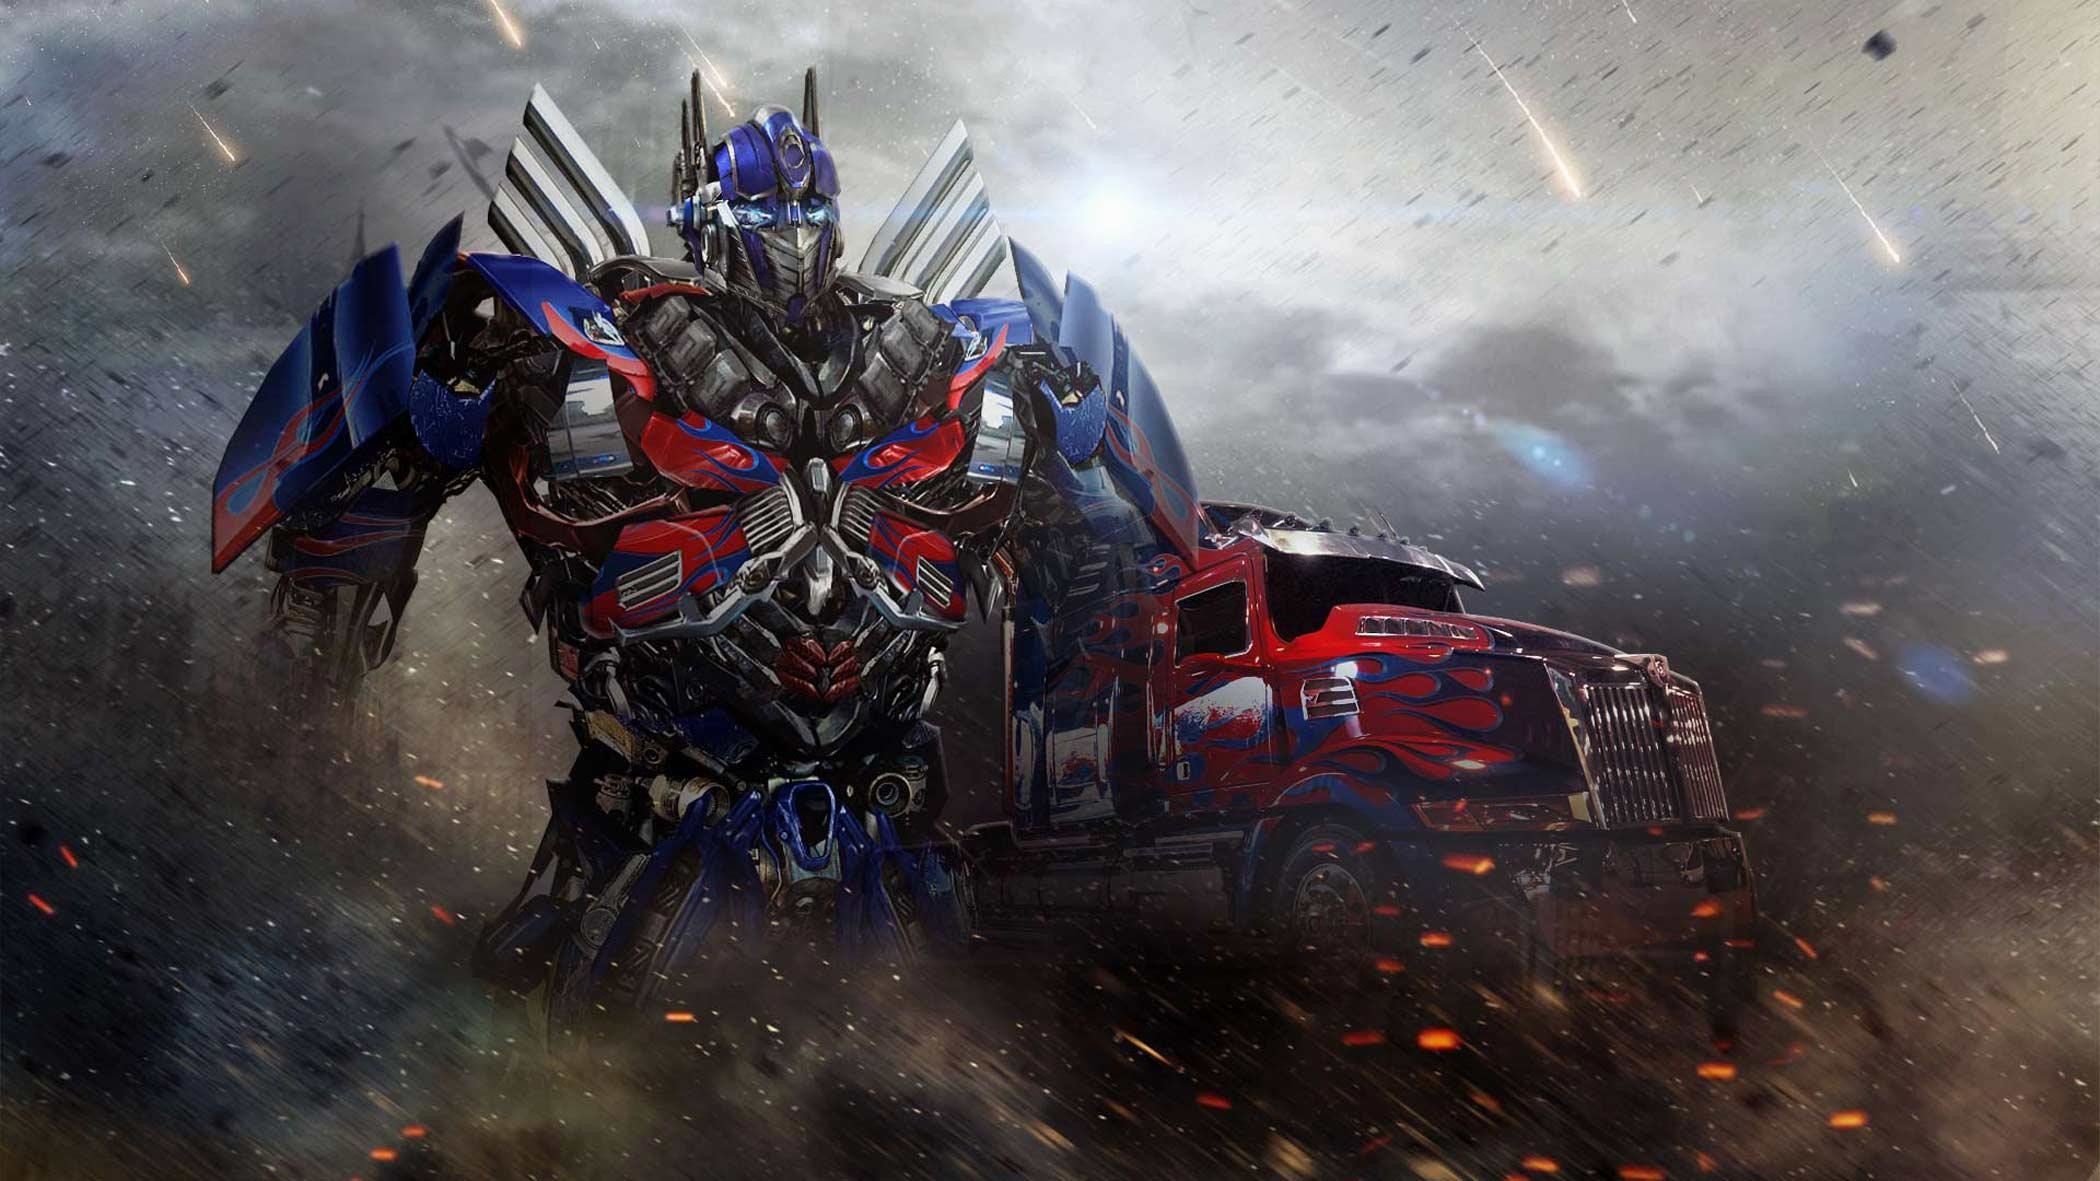 2100x1181 Transformers-4-Age-of-Extinction-Wallpapers-HD